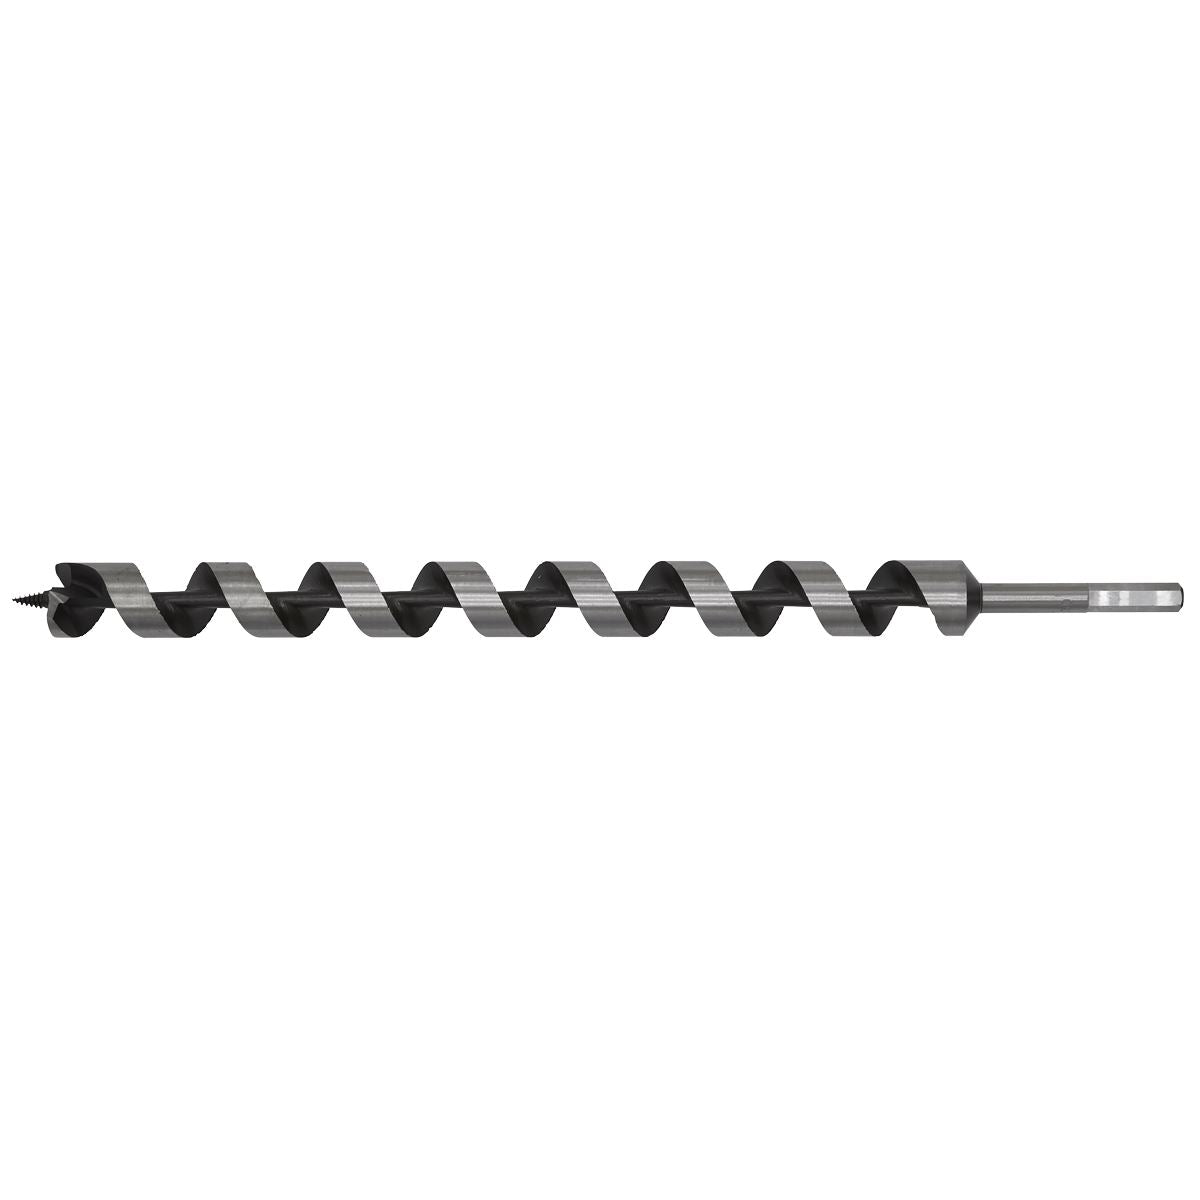 Worksafe by Sealey Auger Wood Drill Bit 30mm x 460mm